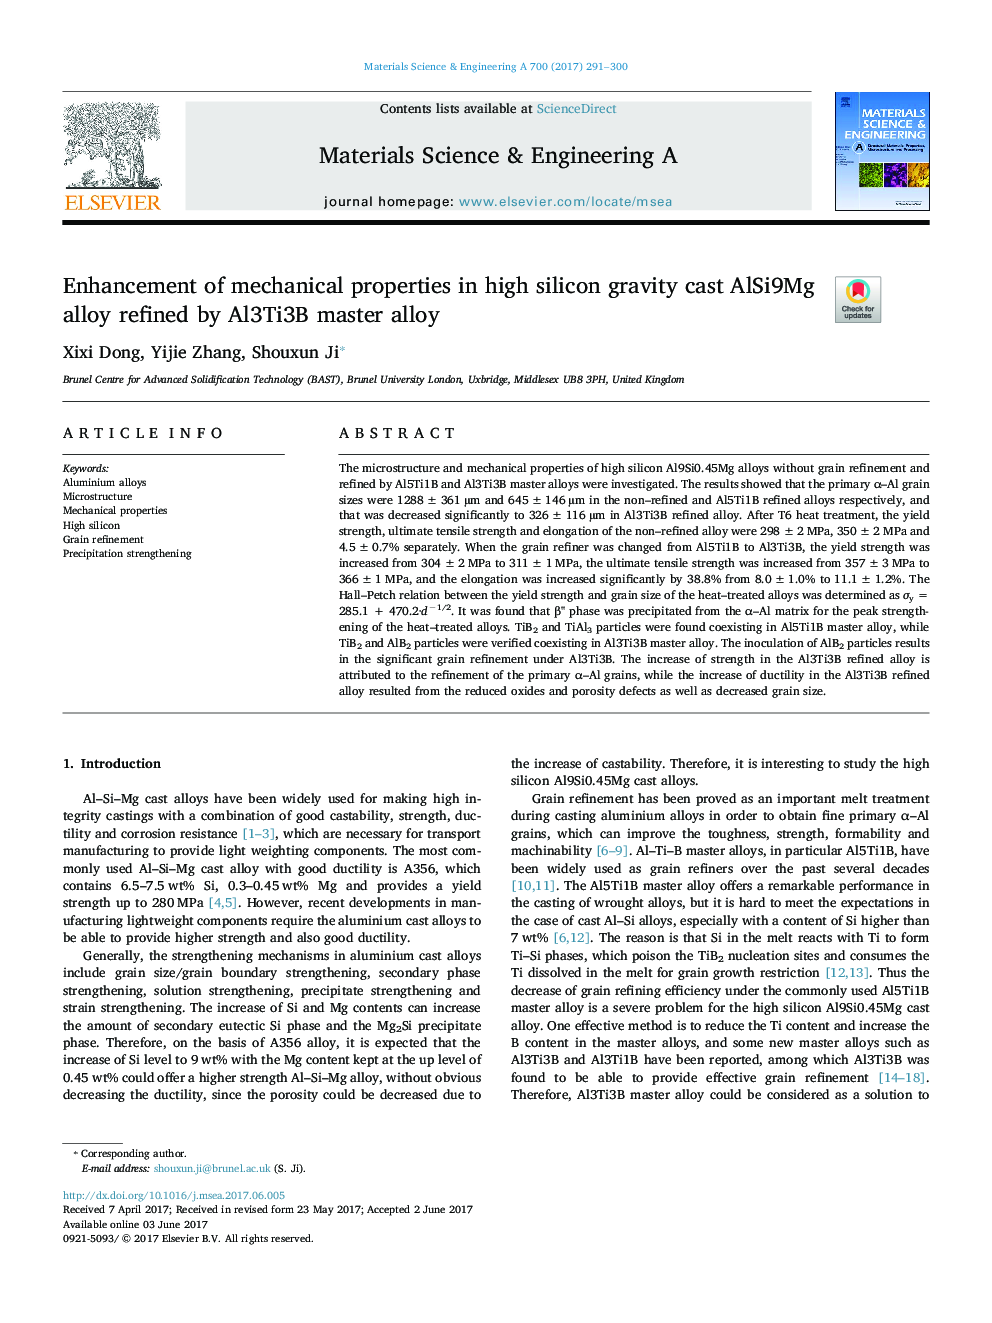 Enhancement of mechanical properties in high silicon gravity cast AlSi9Mg alloy refined by Al3Ti3B master alloy